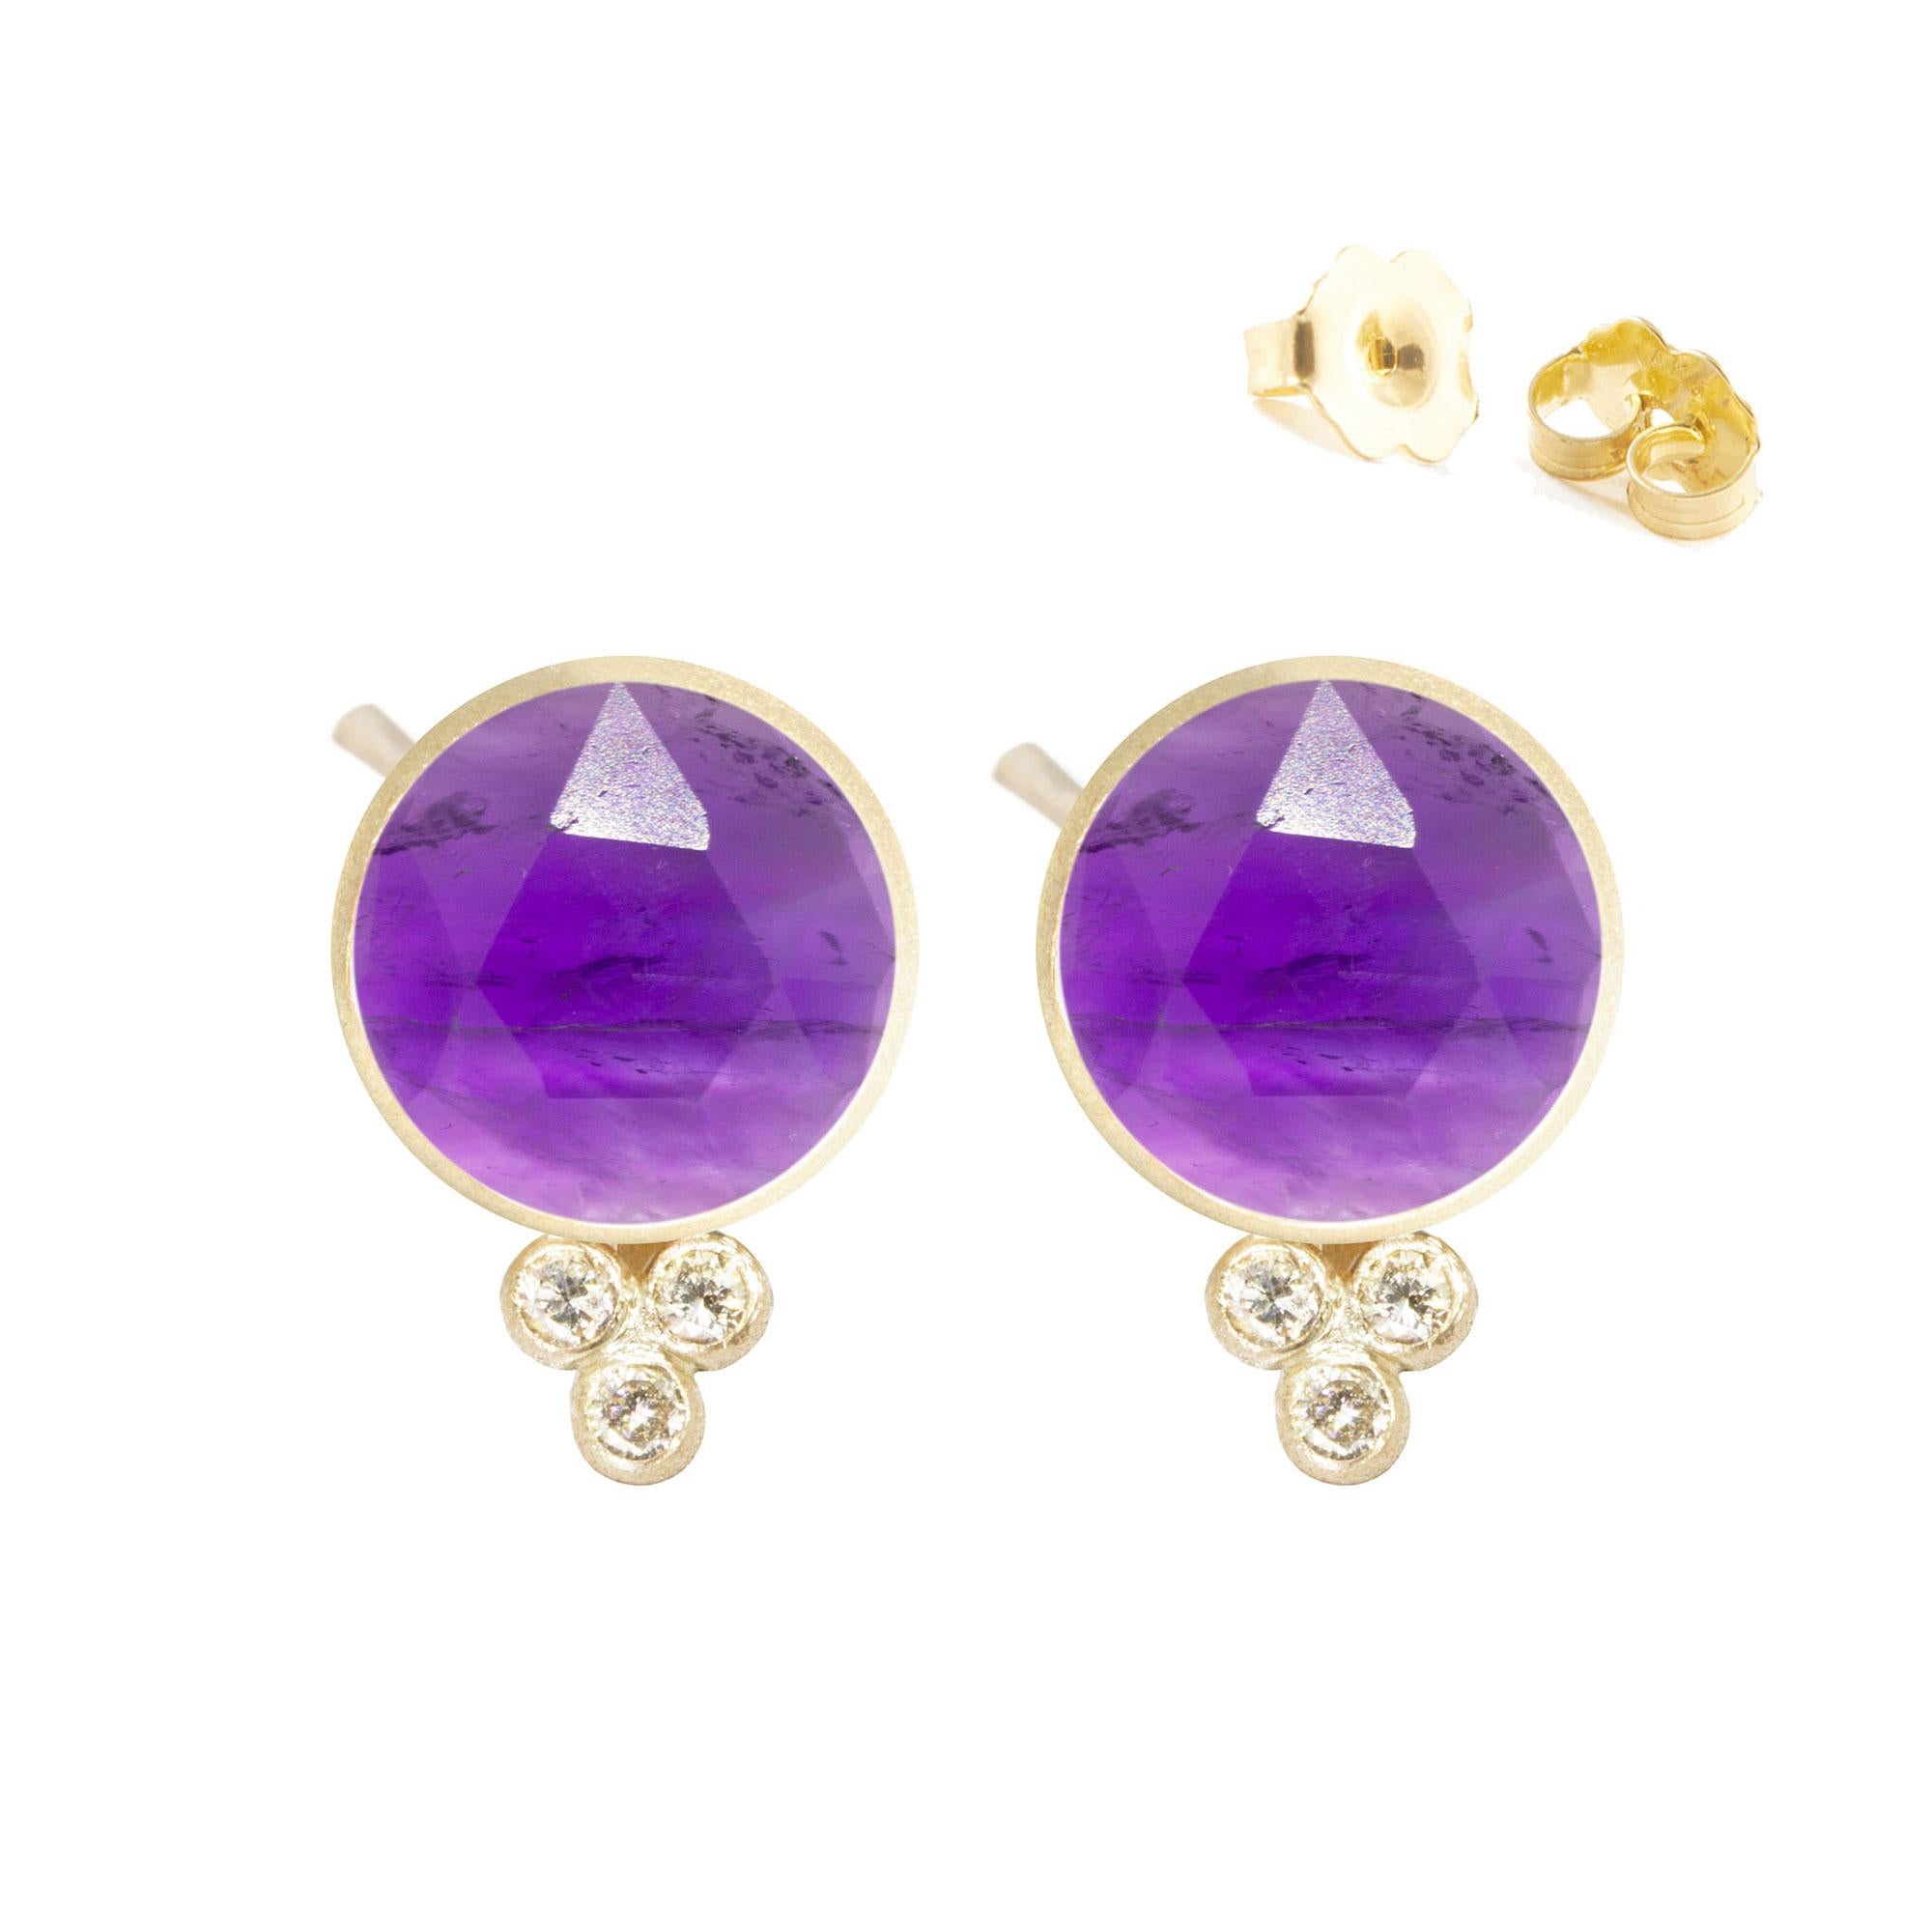 A Nina Nguyen classic: Our Chloe Gold Studs are designed with hand-faceted amethyst rimmed in gold, and accented with diamonds for some extra sparkle.

Nina Nguyen Design's patent-pending earrings have an element on the back of the stud or charm to